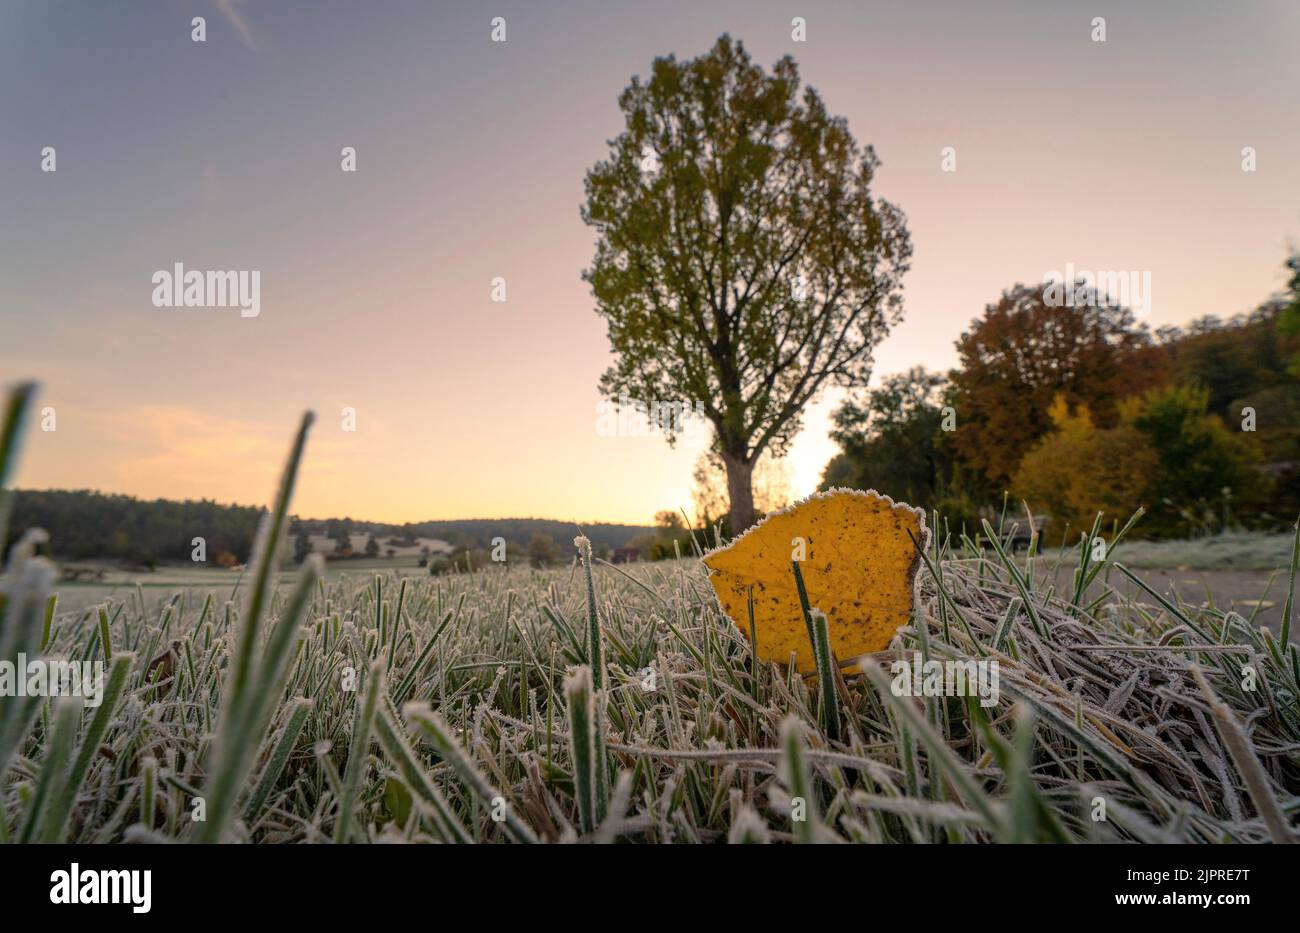 Leaf on frozen grass in autumn mood at sunrise, Gechingen, Germany, Europe Stock Photo